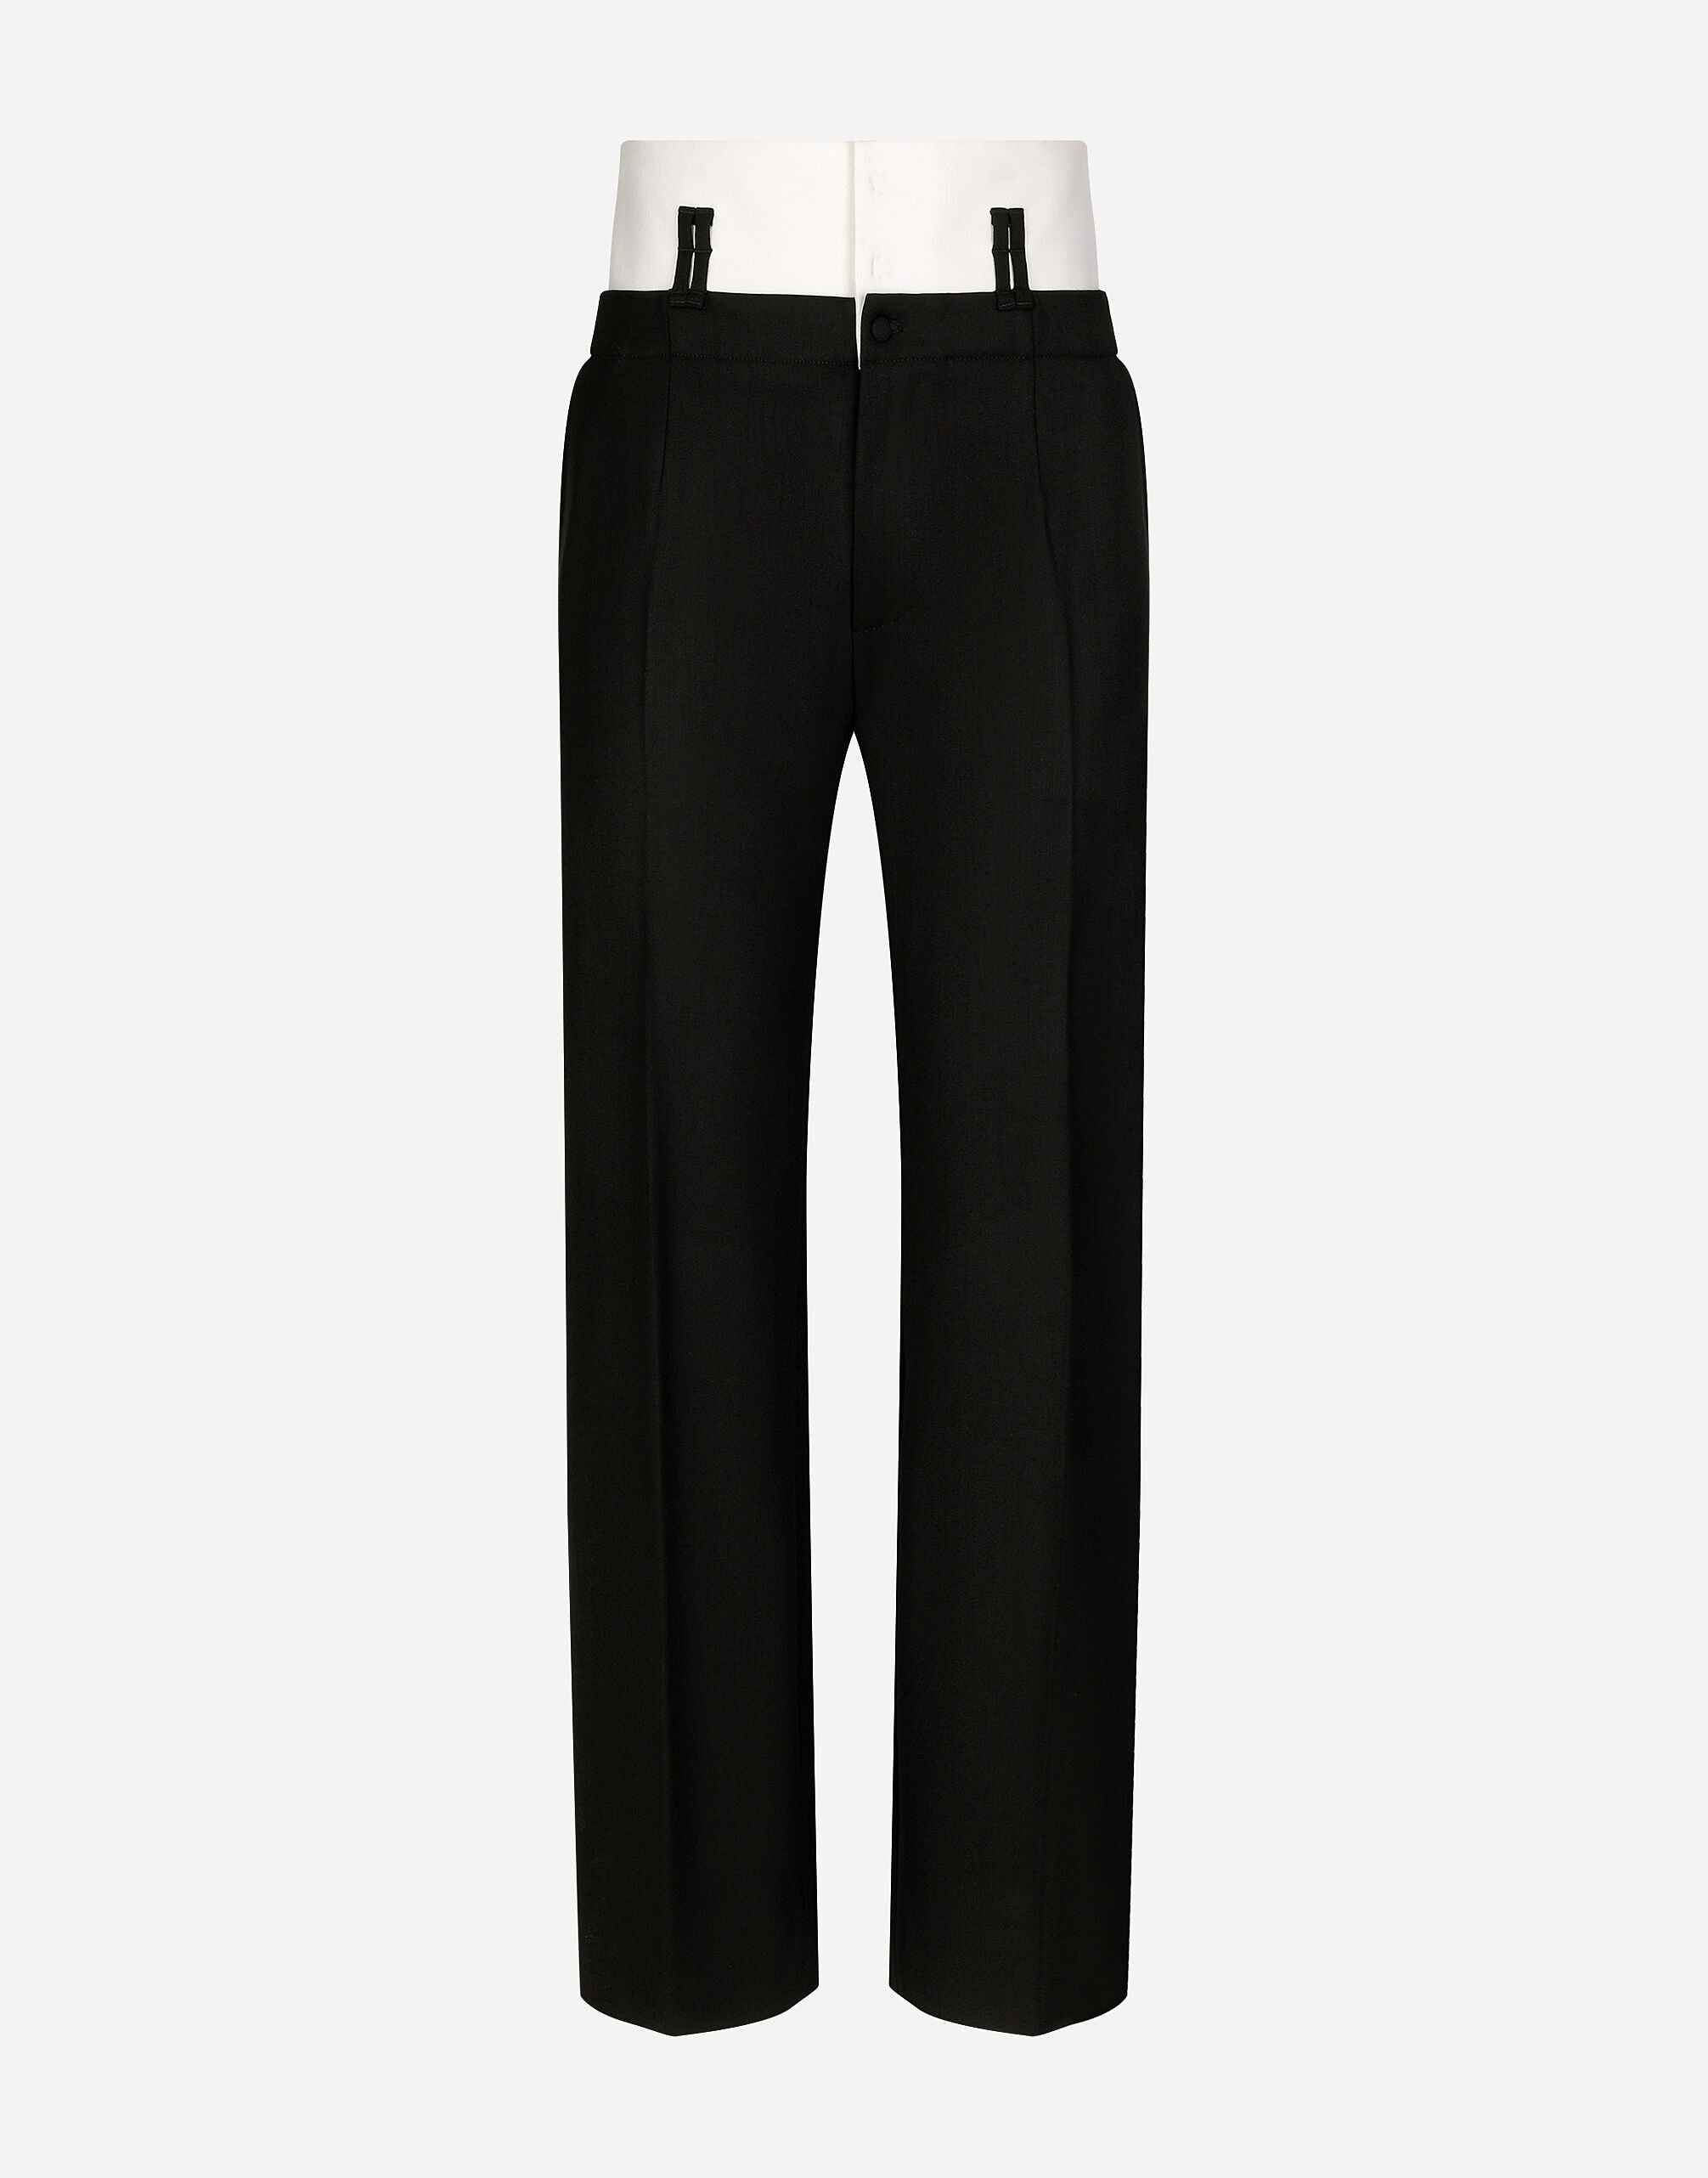 ${brand} Tailored pants with contrasting belt ${colorDescription} ${masterID}